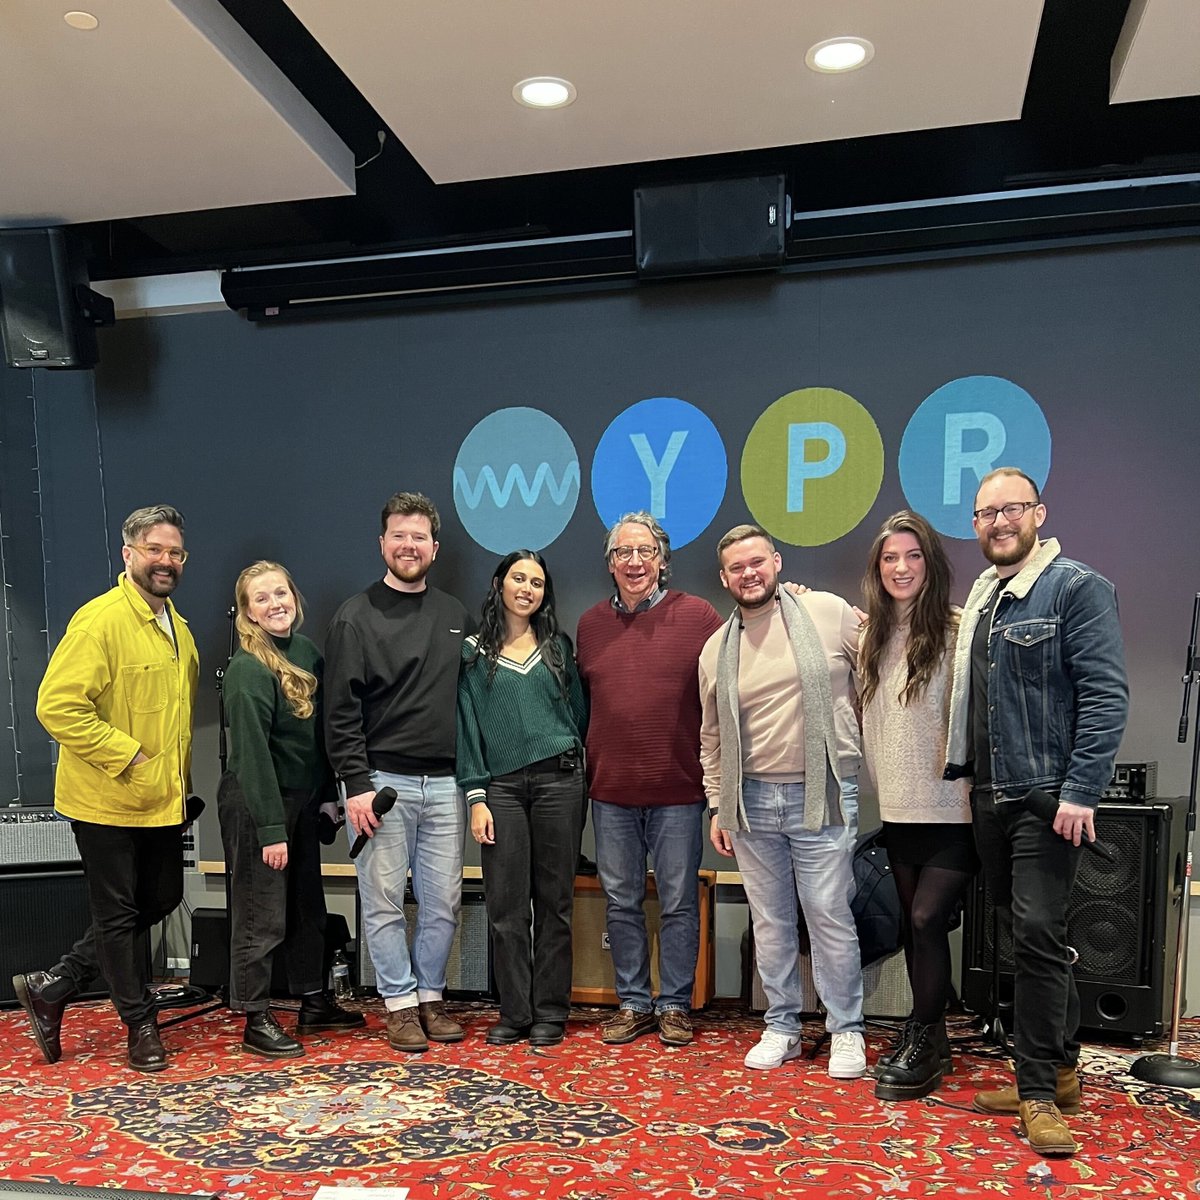 ✨BALTIMORE✨ Loved being on @WYPR881FM Midday Show! We’ll be performing at @KornerKeystone #Baltimore tonight! Come on down! >>> shorturl.at/evzN1 #swinglesontour